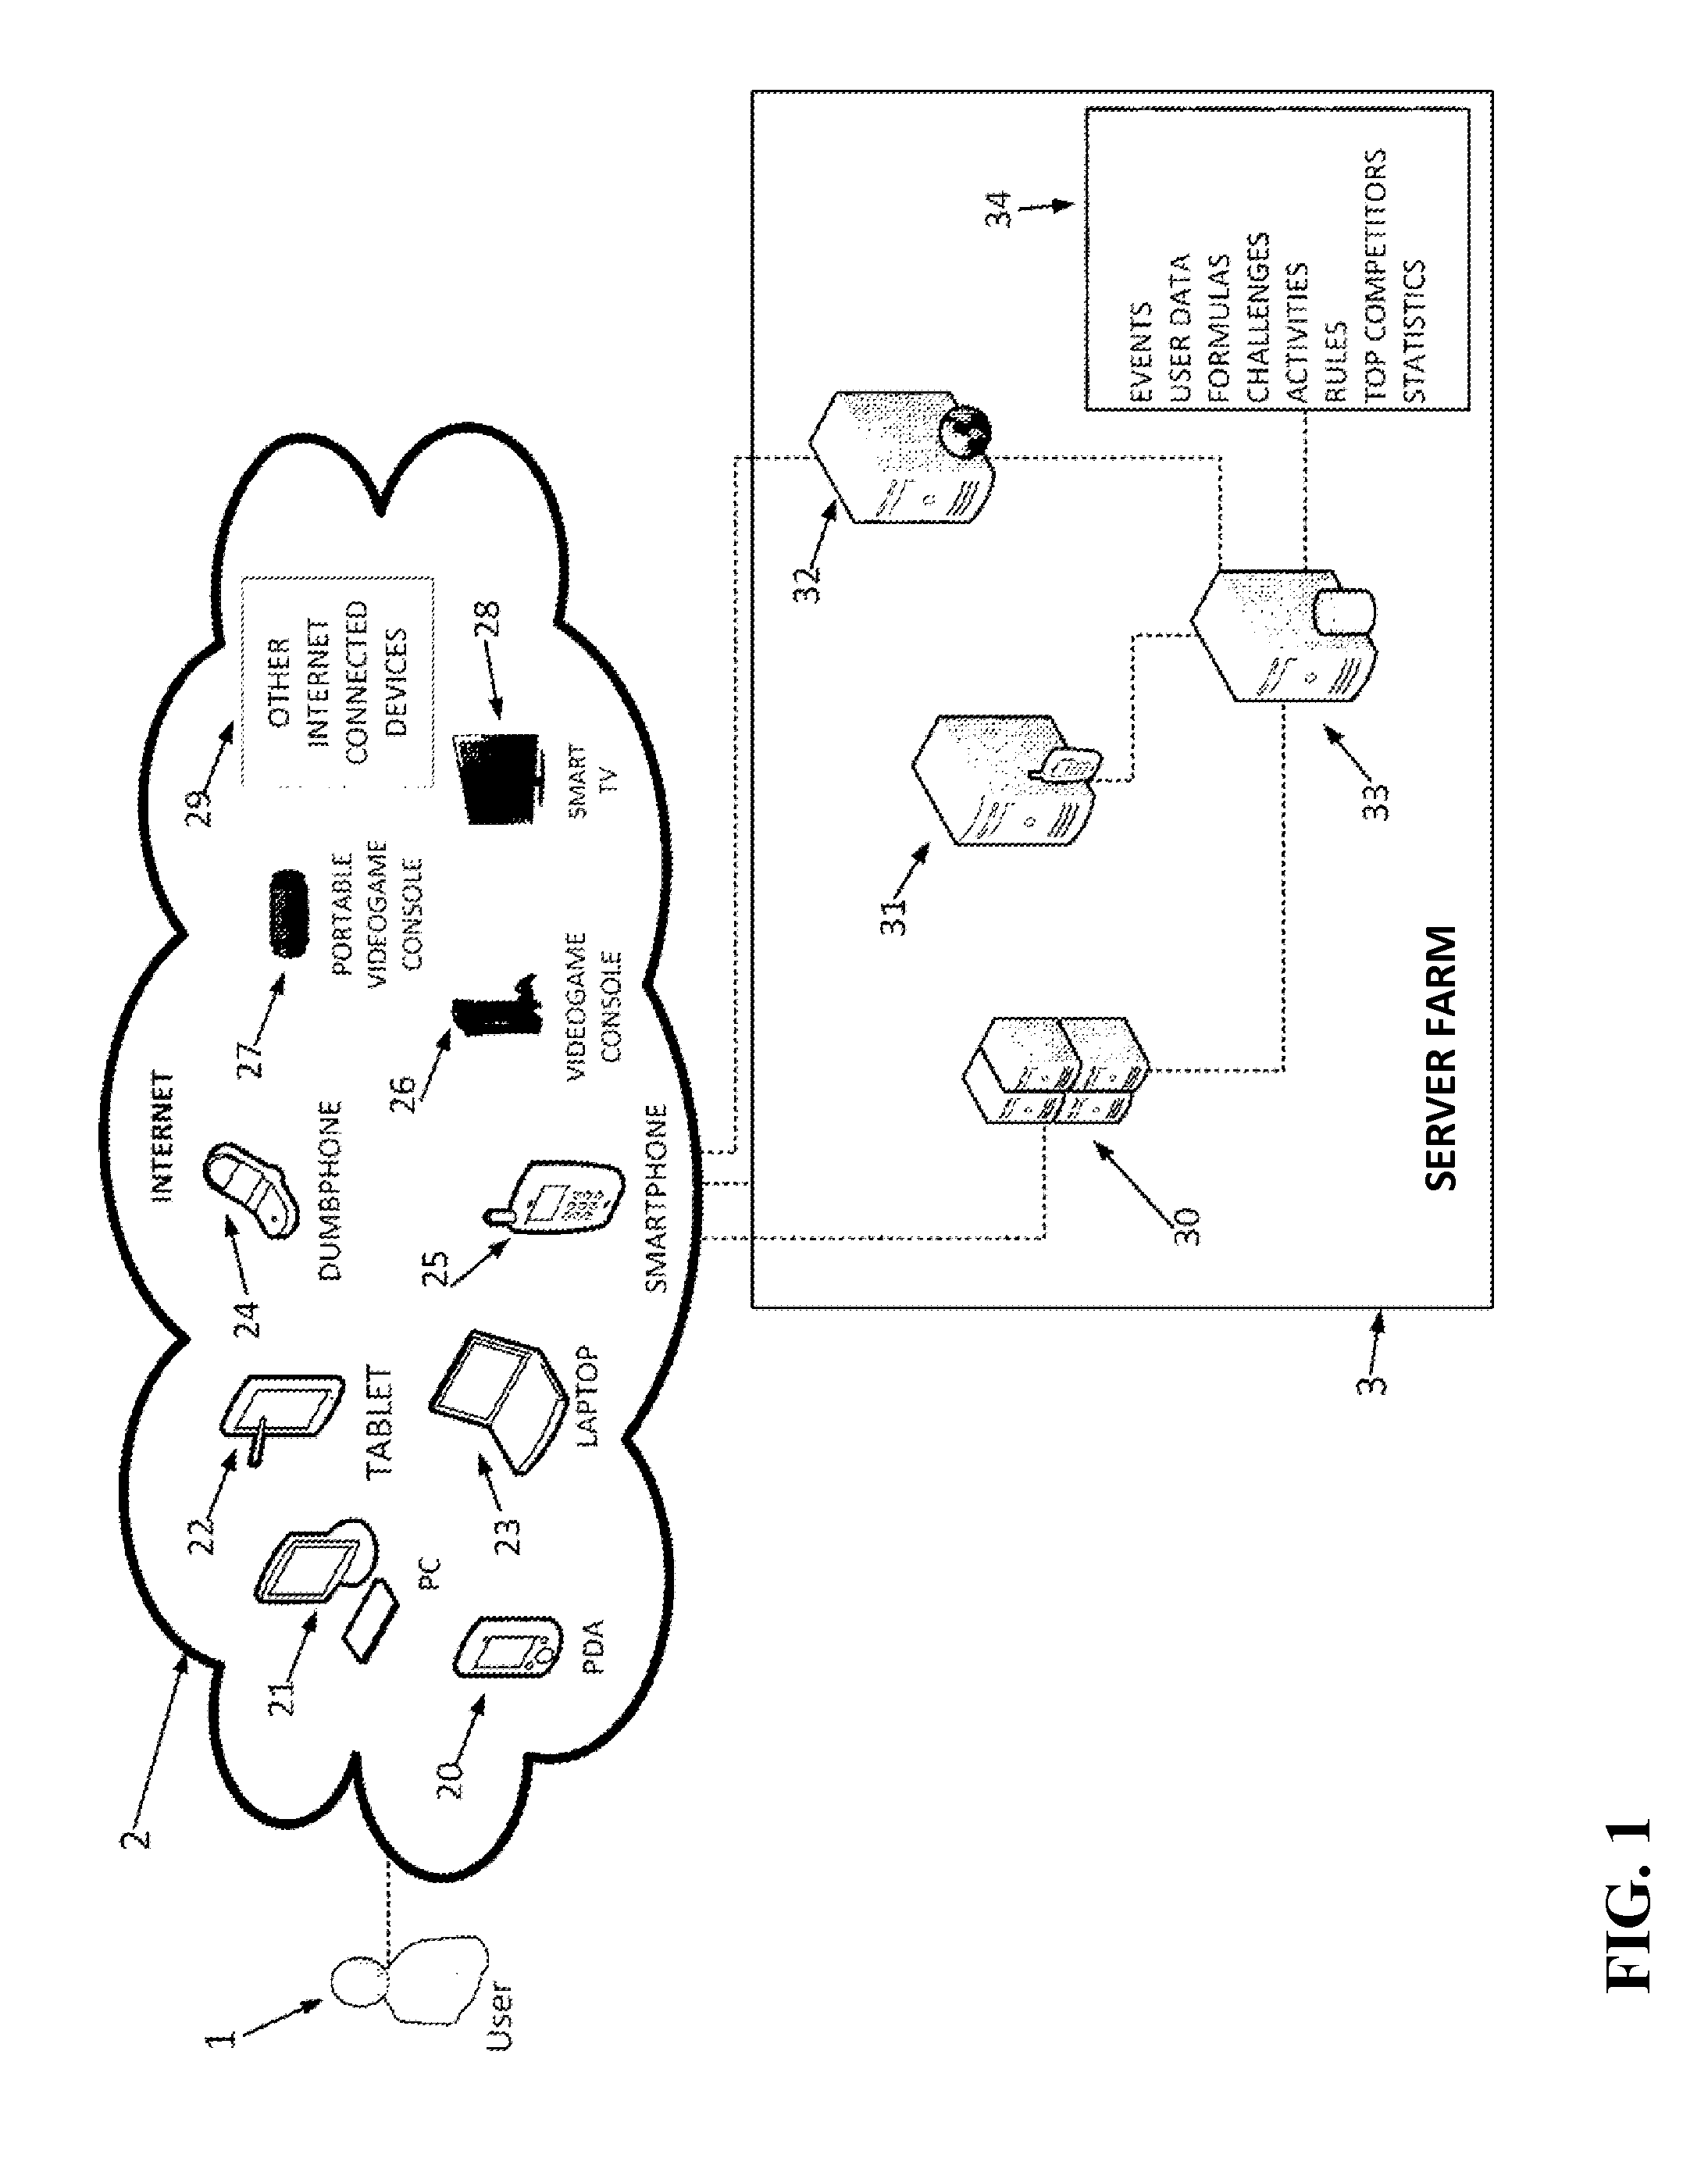 Systems and methods for an internet competition network